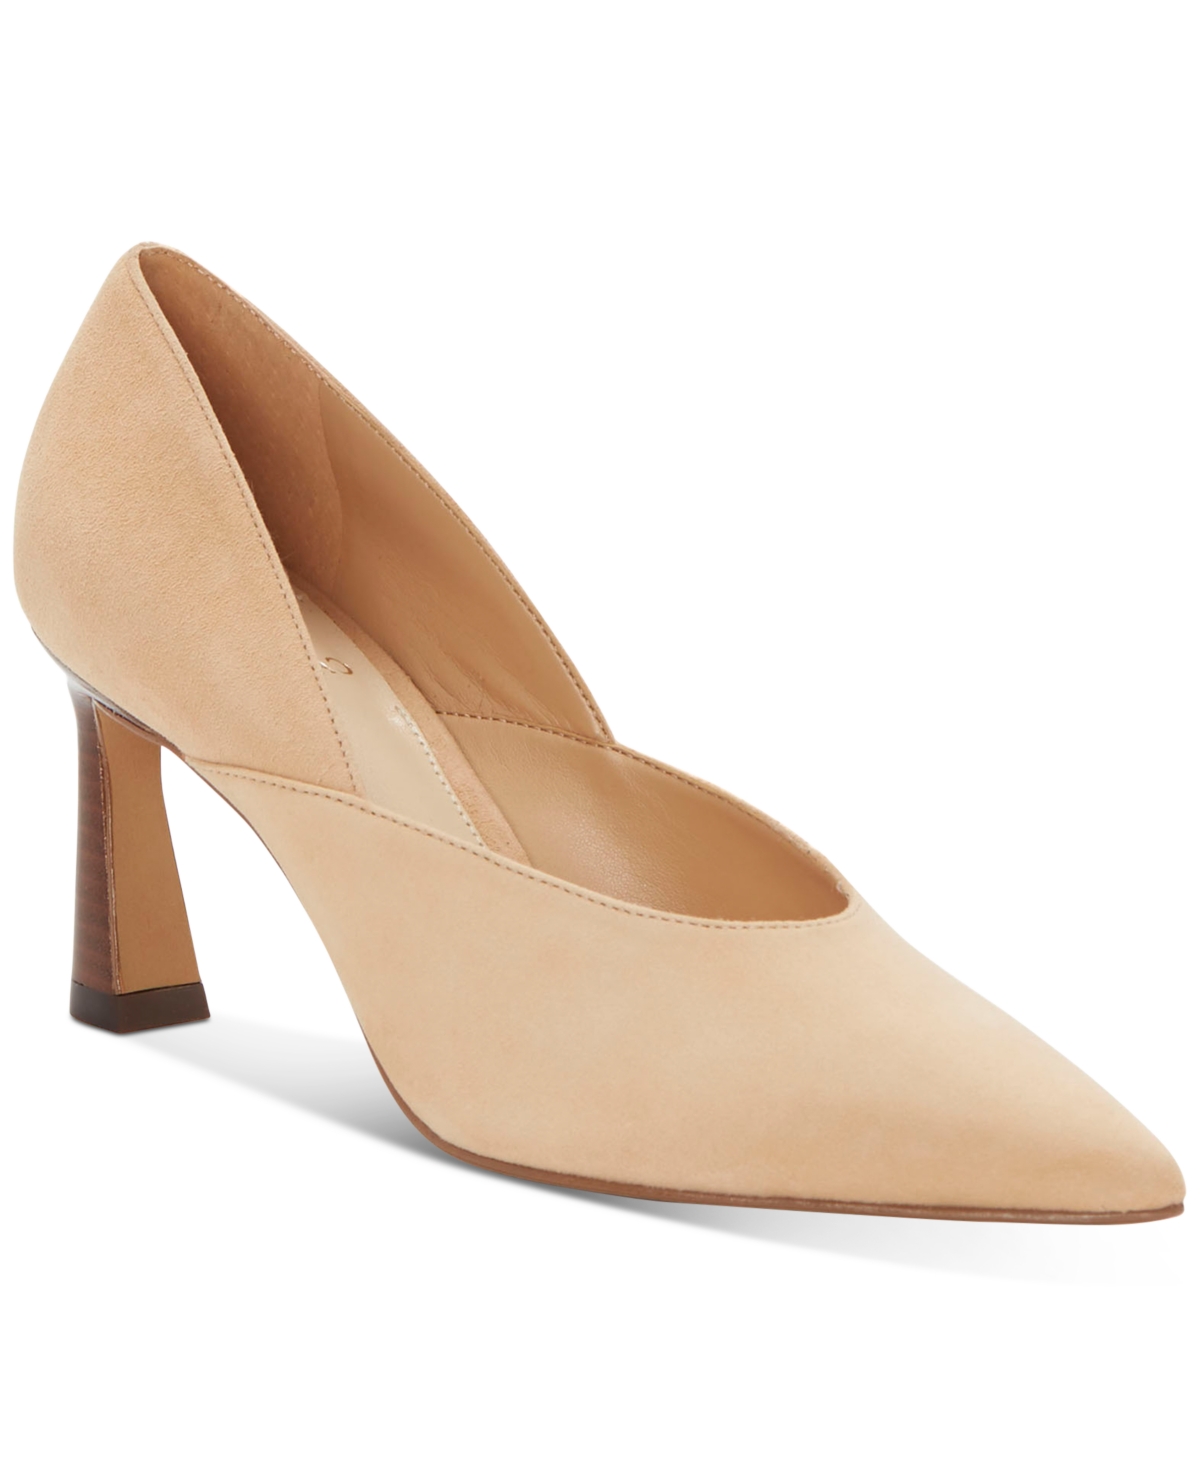 UPC 191707306622 product image for Vince Camuto Women's Kastani Pointed-Toe Pumps Women's Shoes | upcitemdb.com